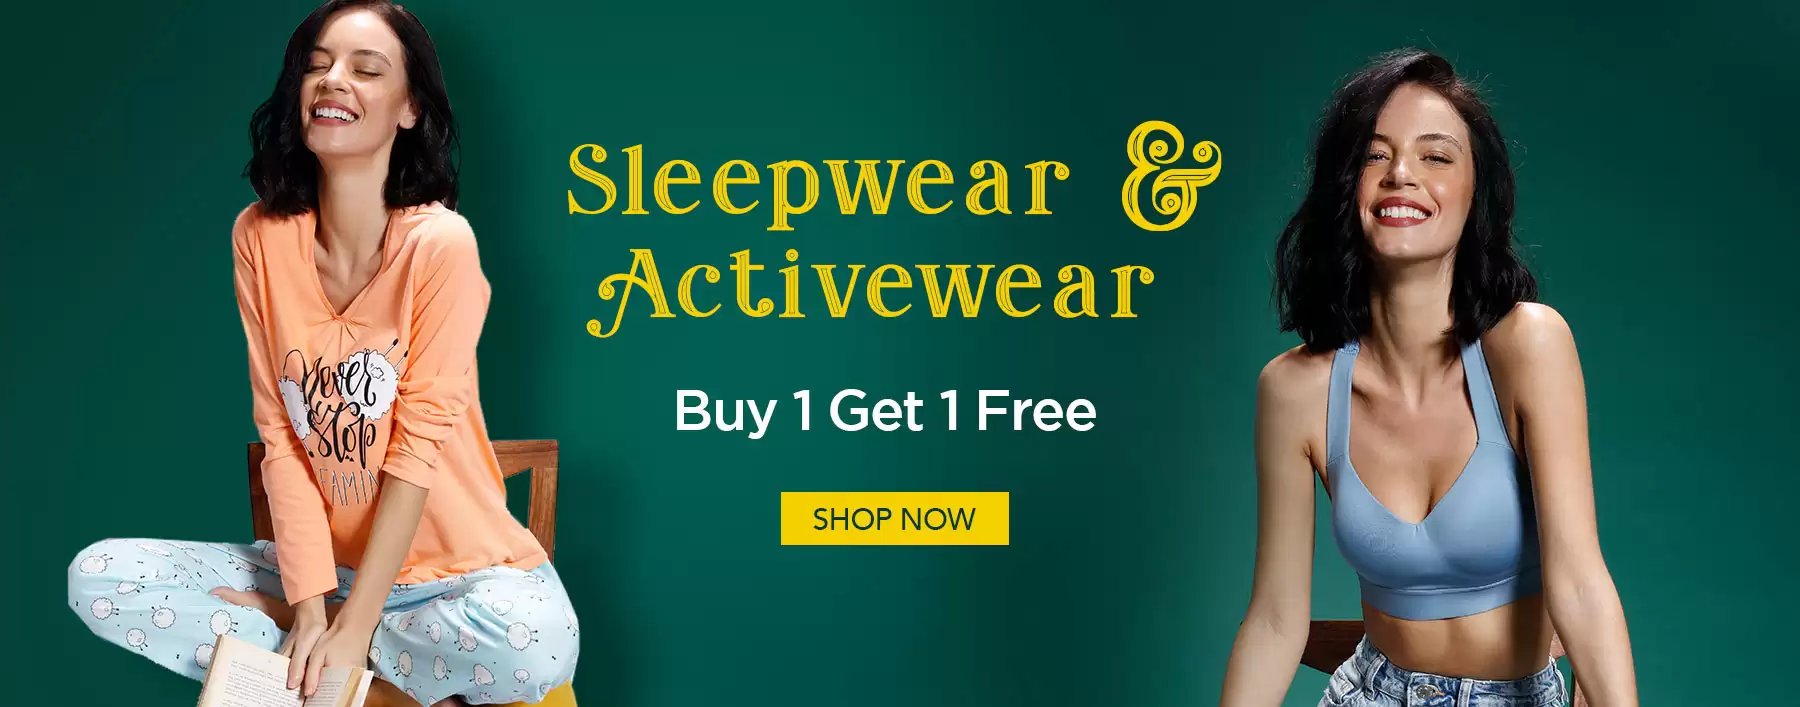 Enjoy Buy 1 Get 1 Free Offer On Zivame Active Wear At Zivame Deal Page